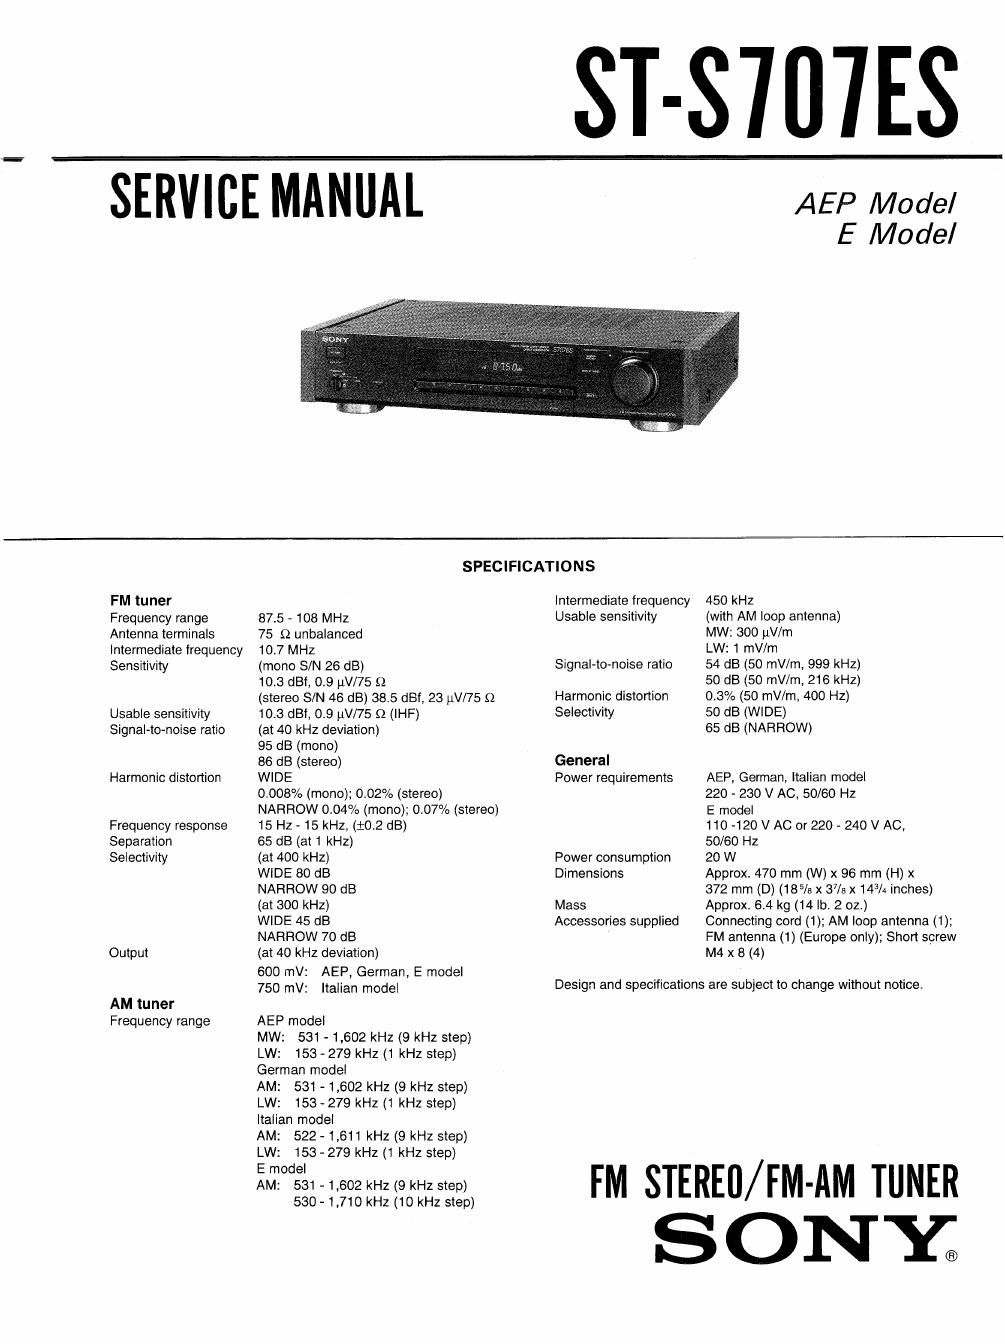 sony st s 707 es service manual